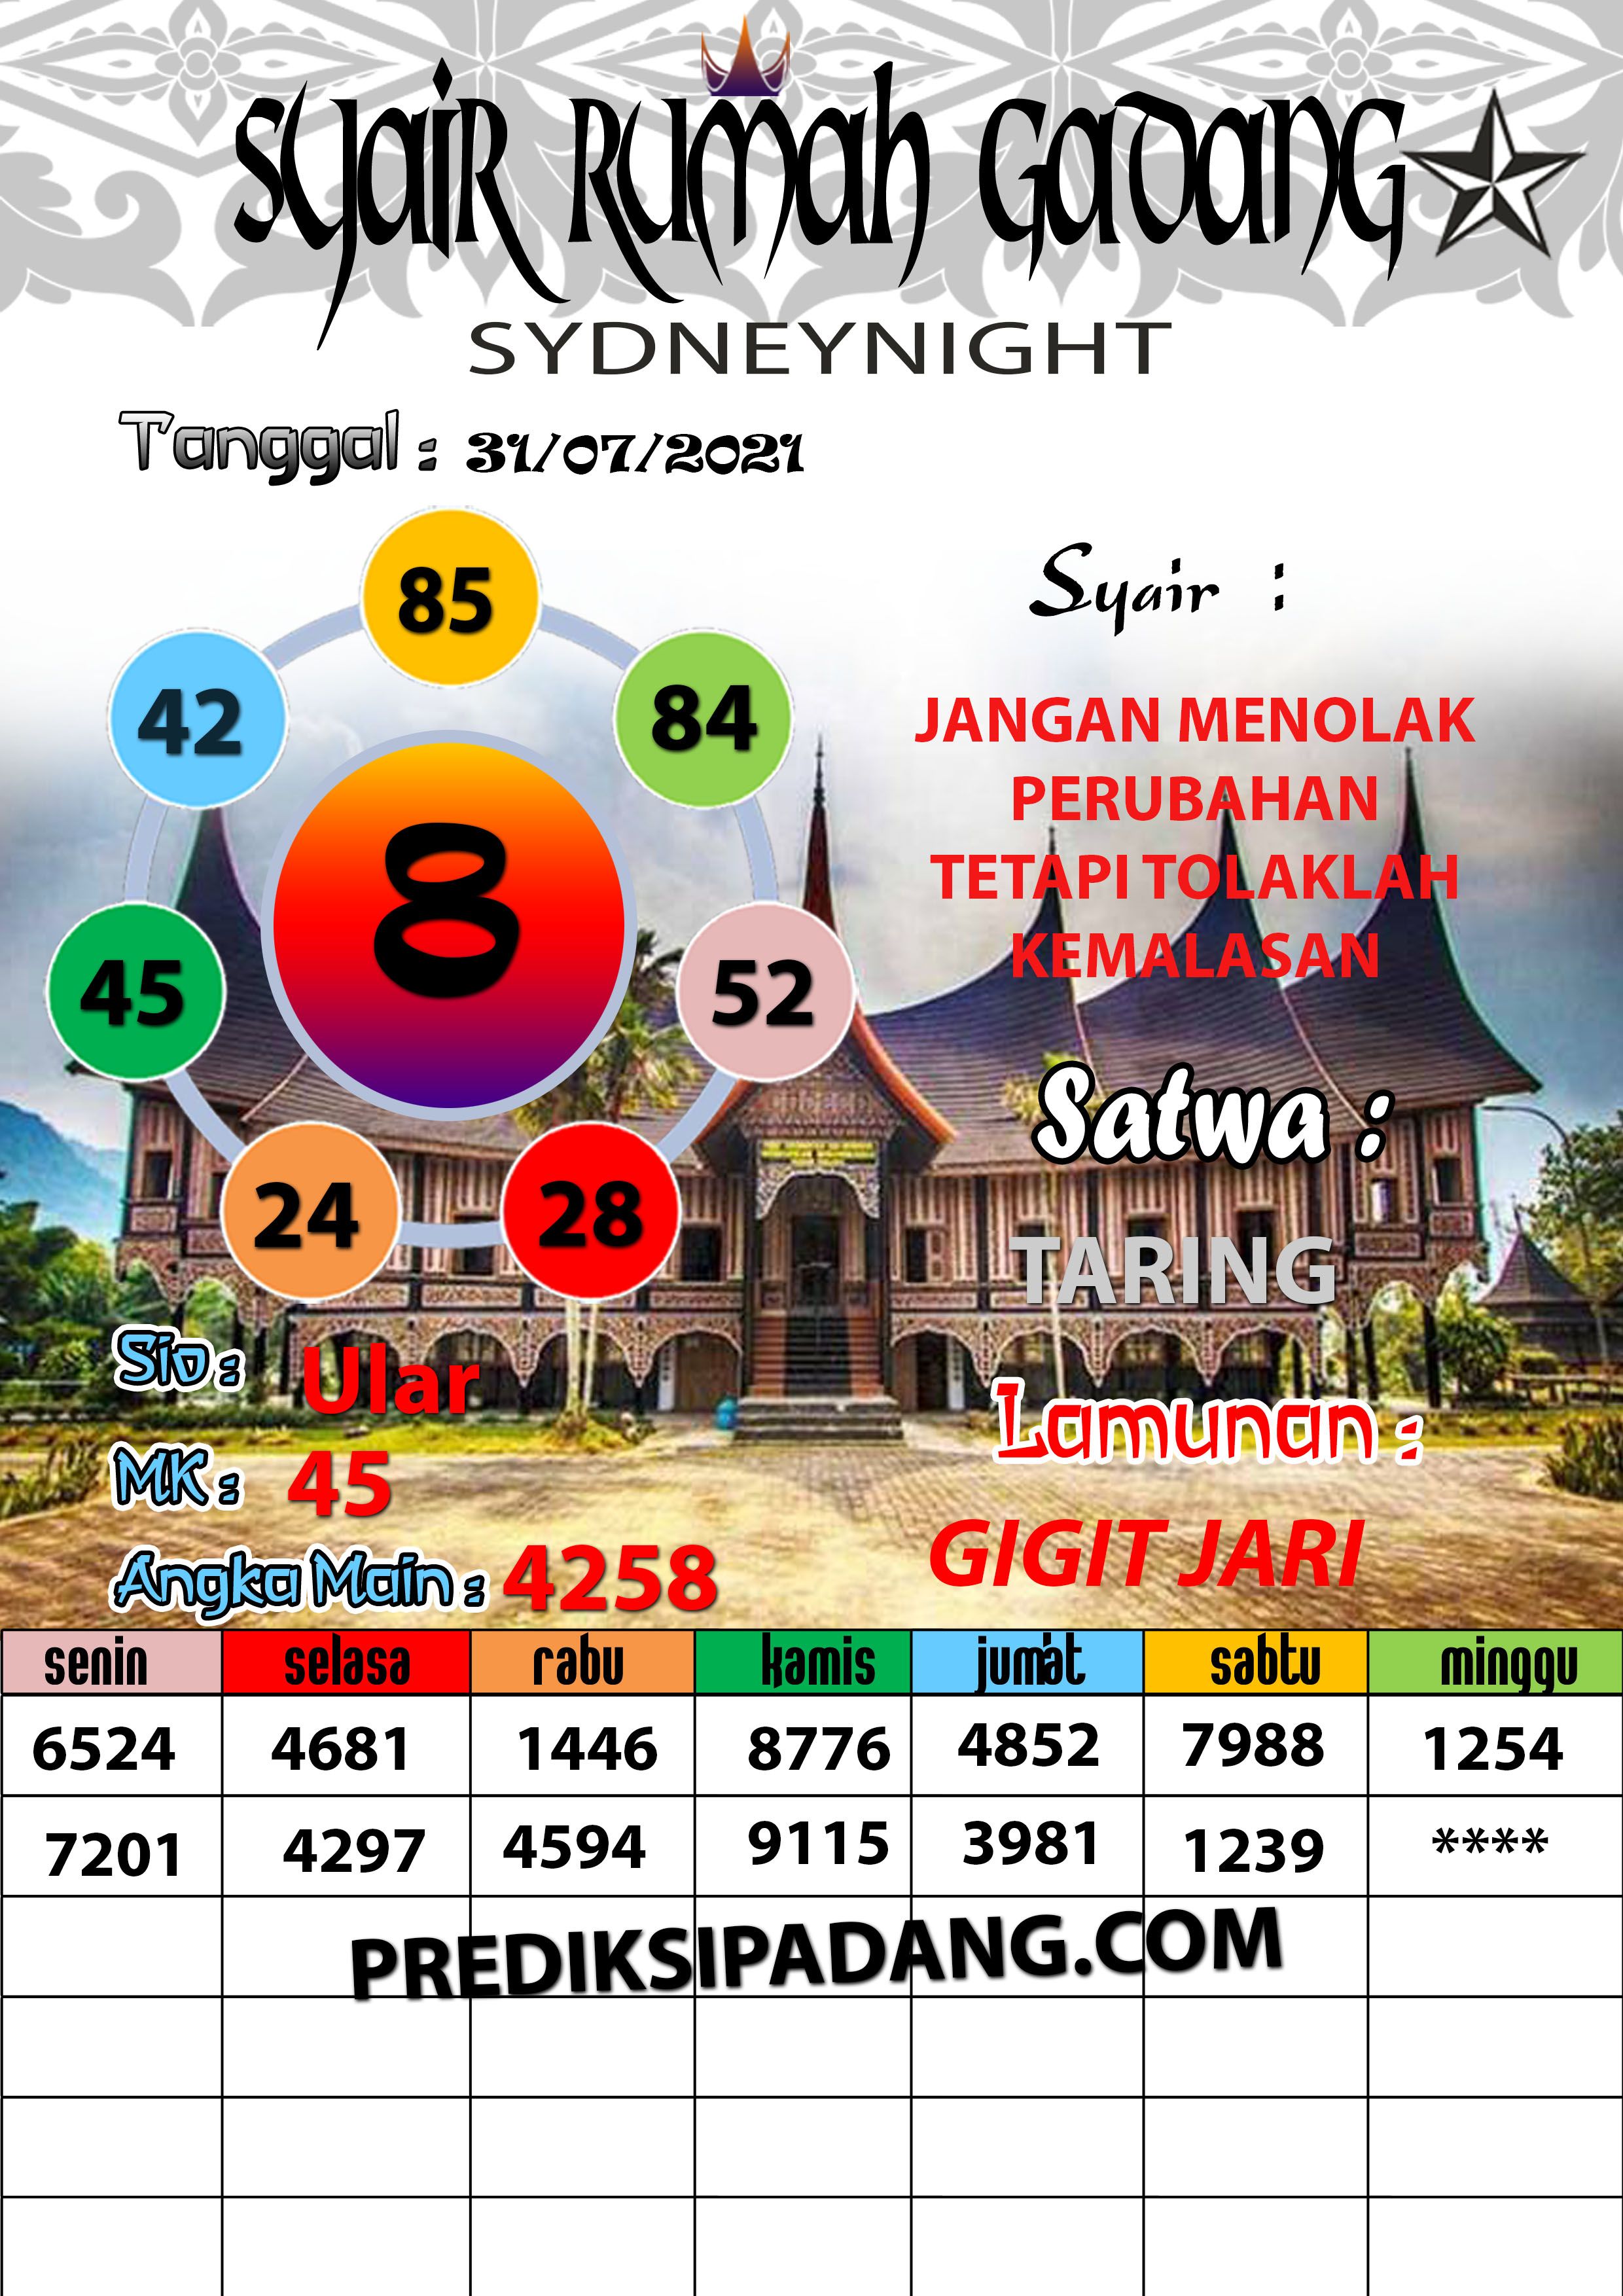 PADANG%20TOTO%20SIDNEYNIGHT-Recovered-Recovered.jpeg